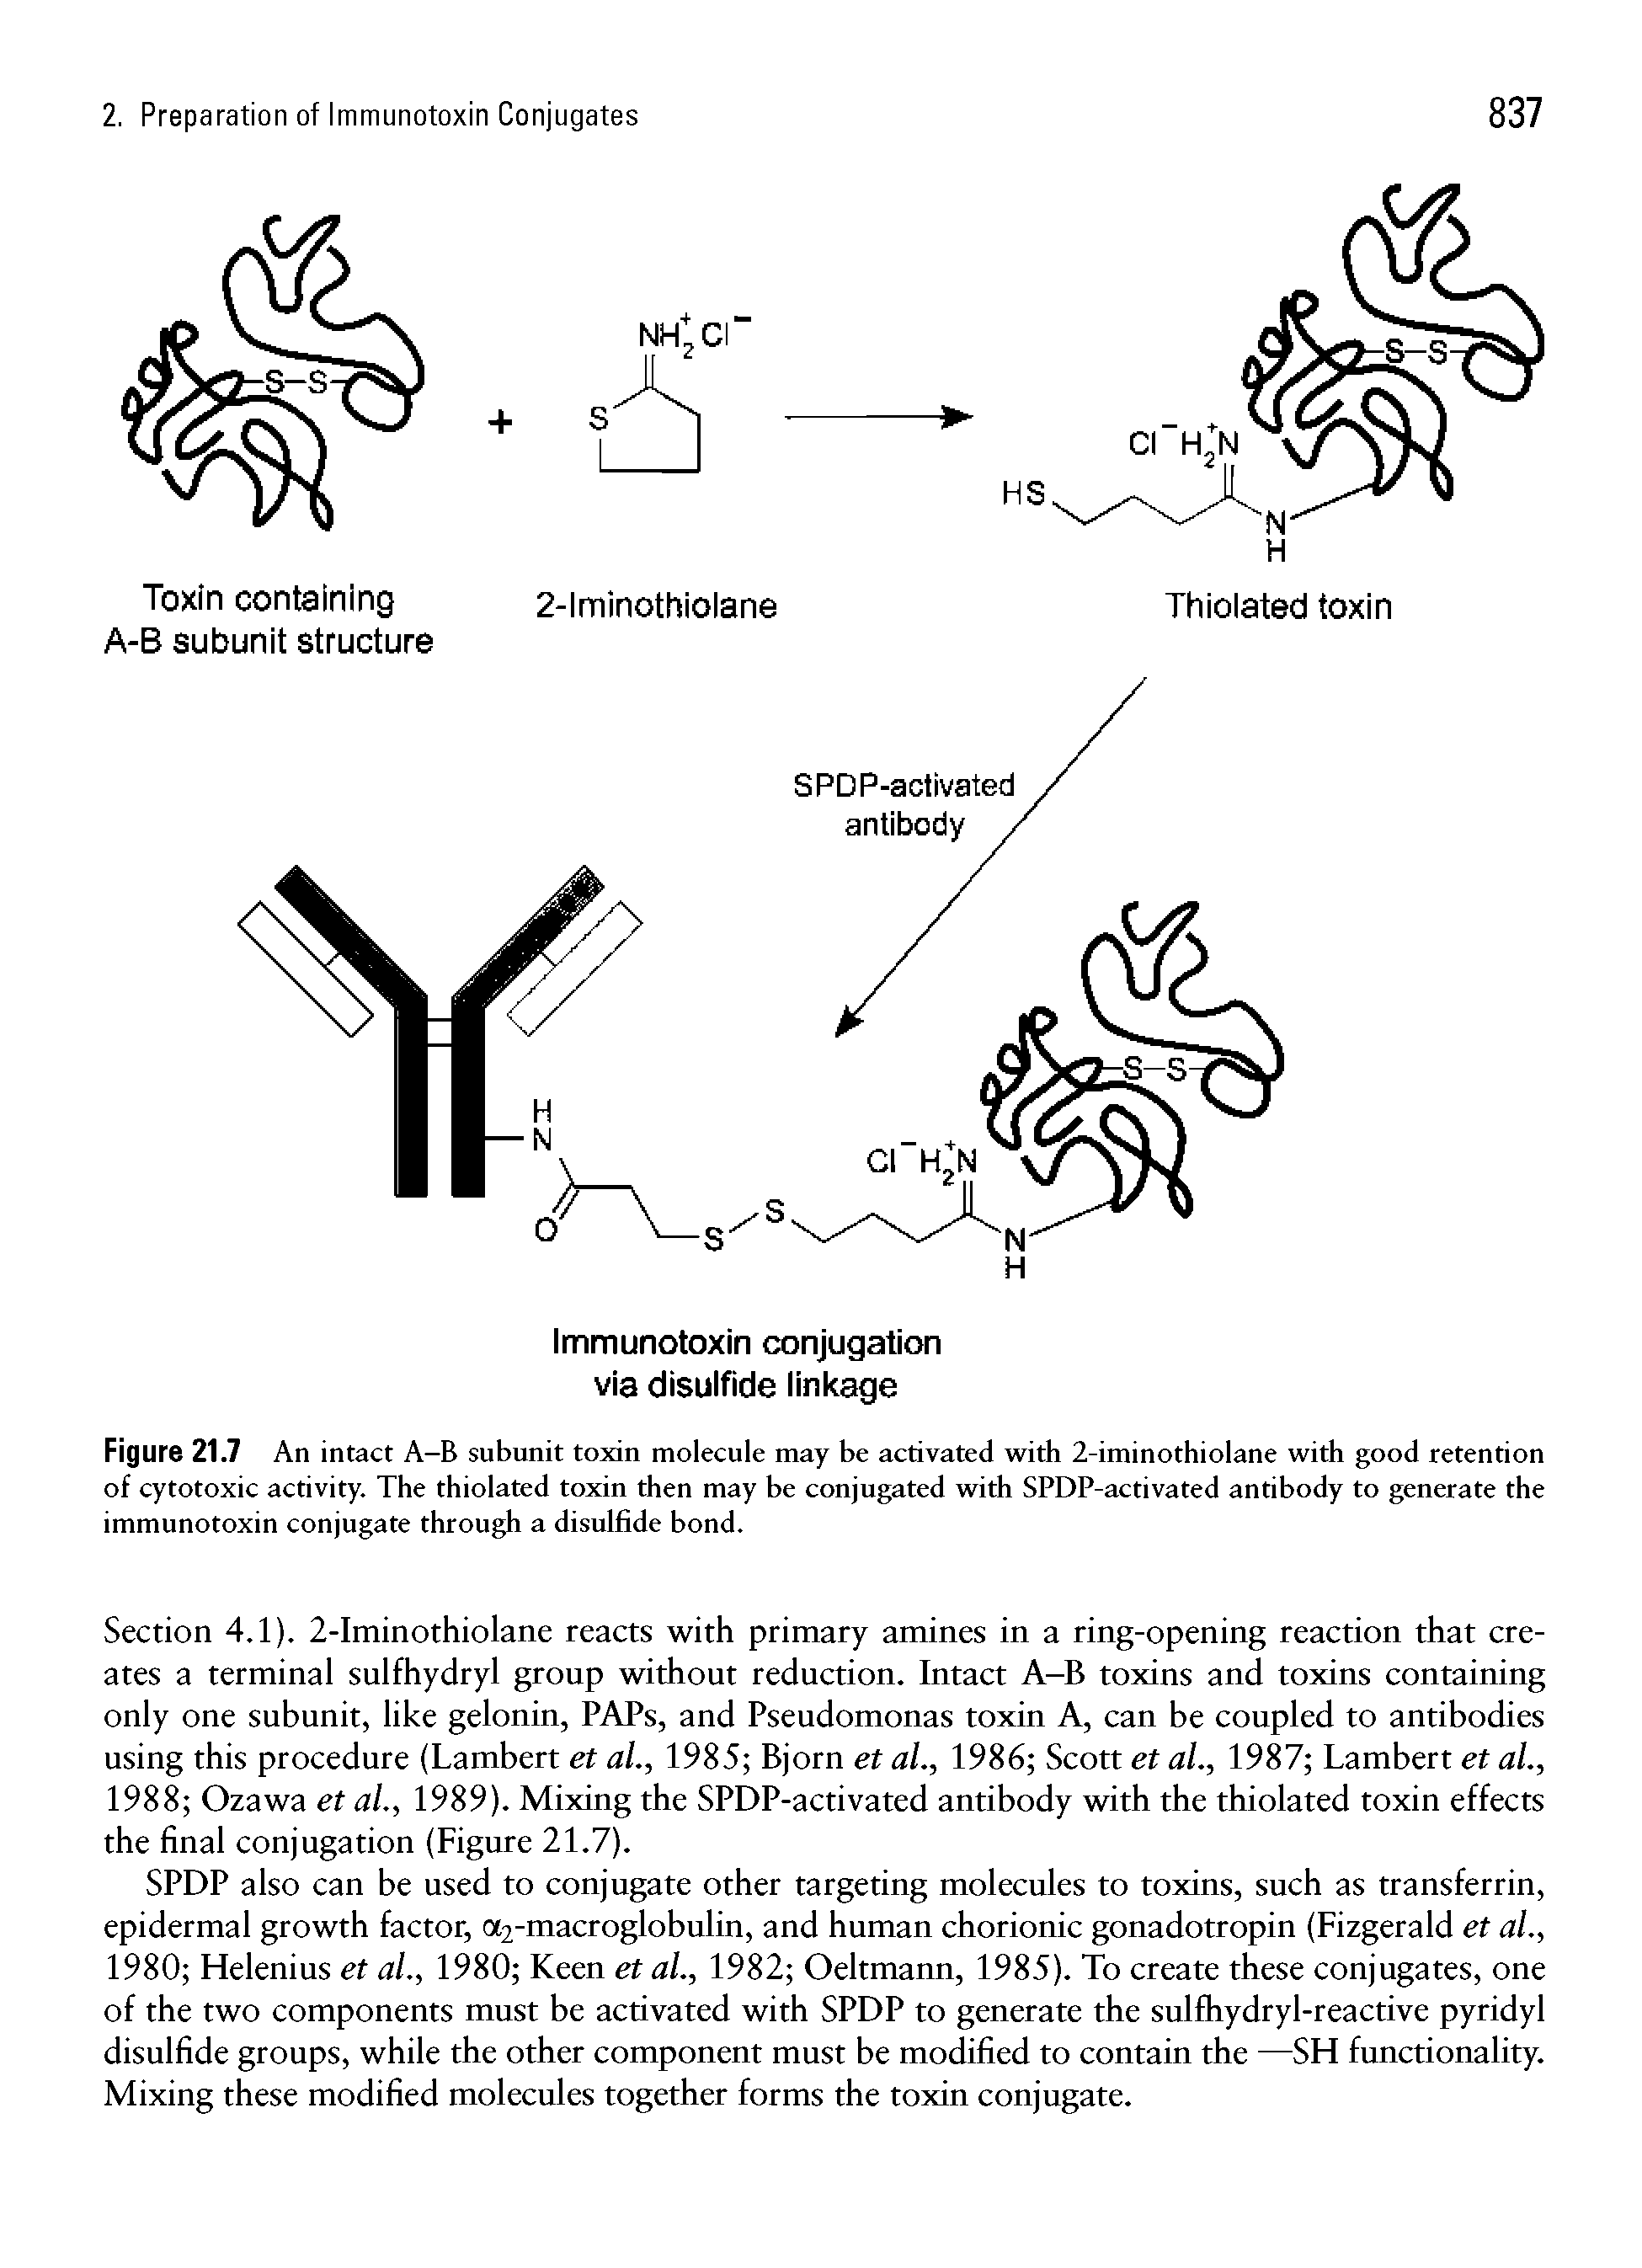 Figure 21.7 An intact A-B subunit toxin molecule may be activated with 2-iminothiolane with good retention of cytotoxic activity. The thiolated toxin then may be conjugated with SPDP-activated antibody to generate the immunotoxin conjugate through a disulfide bond.